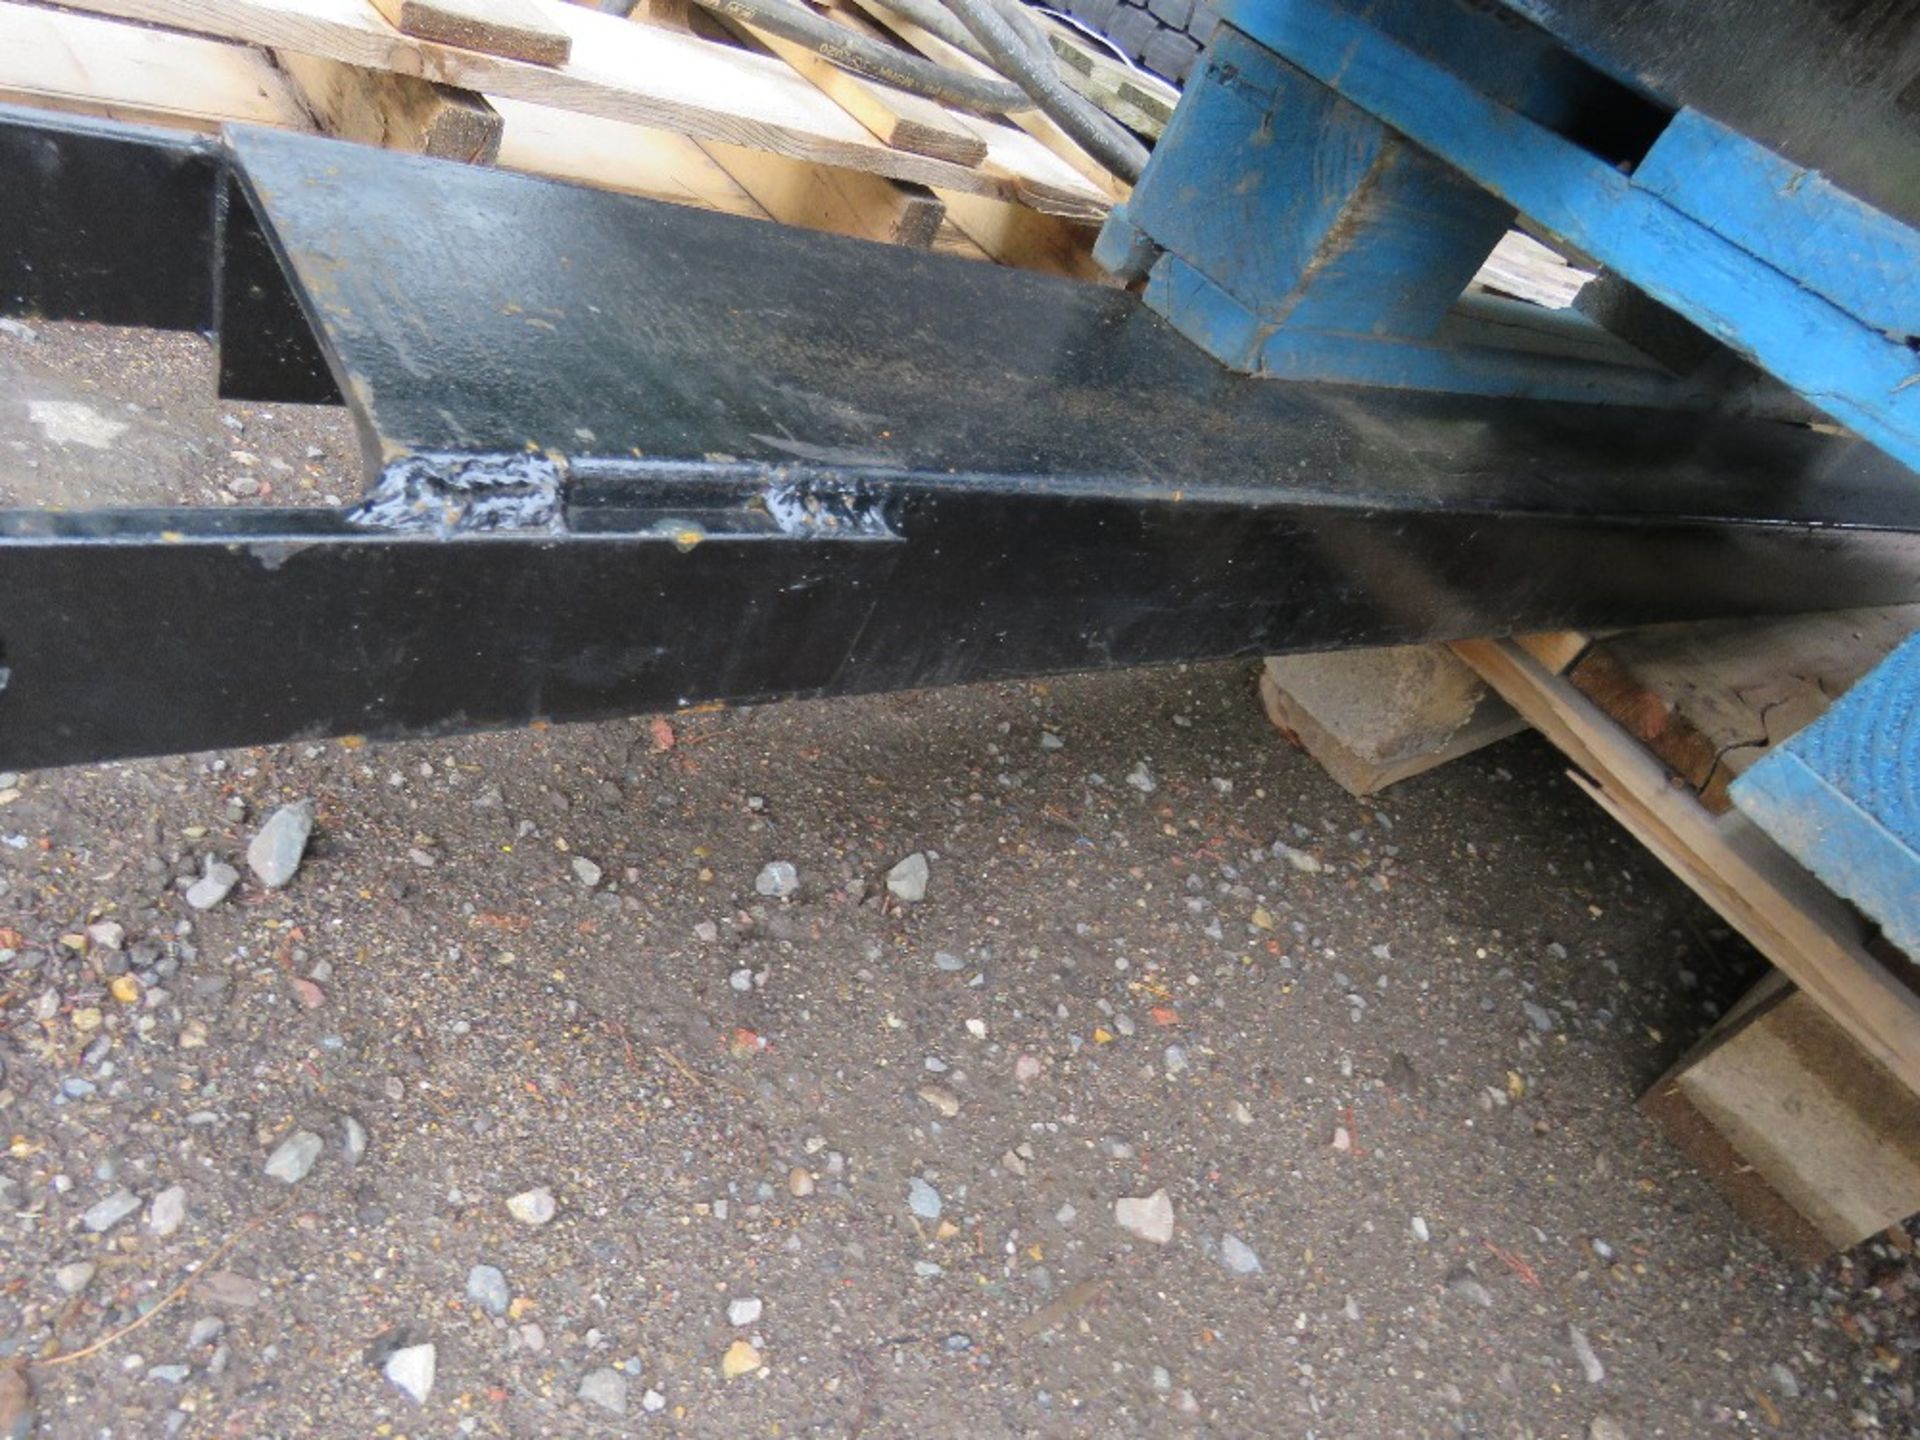 PAIR OF 6FT LENGTH FORKLIFT EXTENSION TINES/SLEEVES, 6" WIDTH, WITH LOCKING PINS. - Image 3 of 3